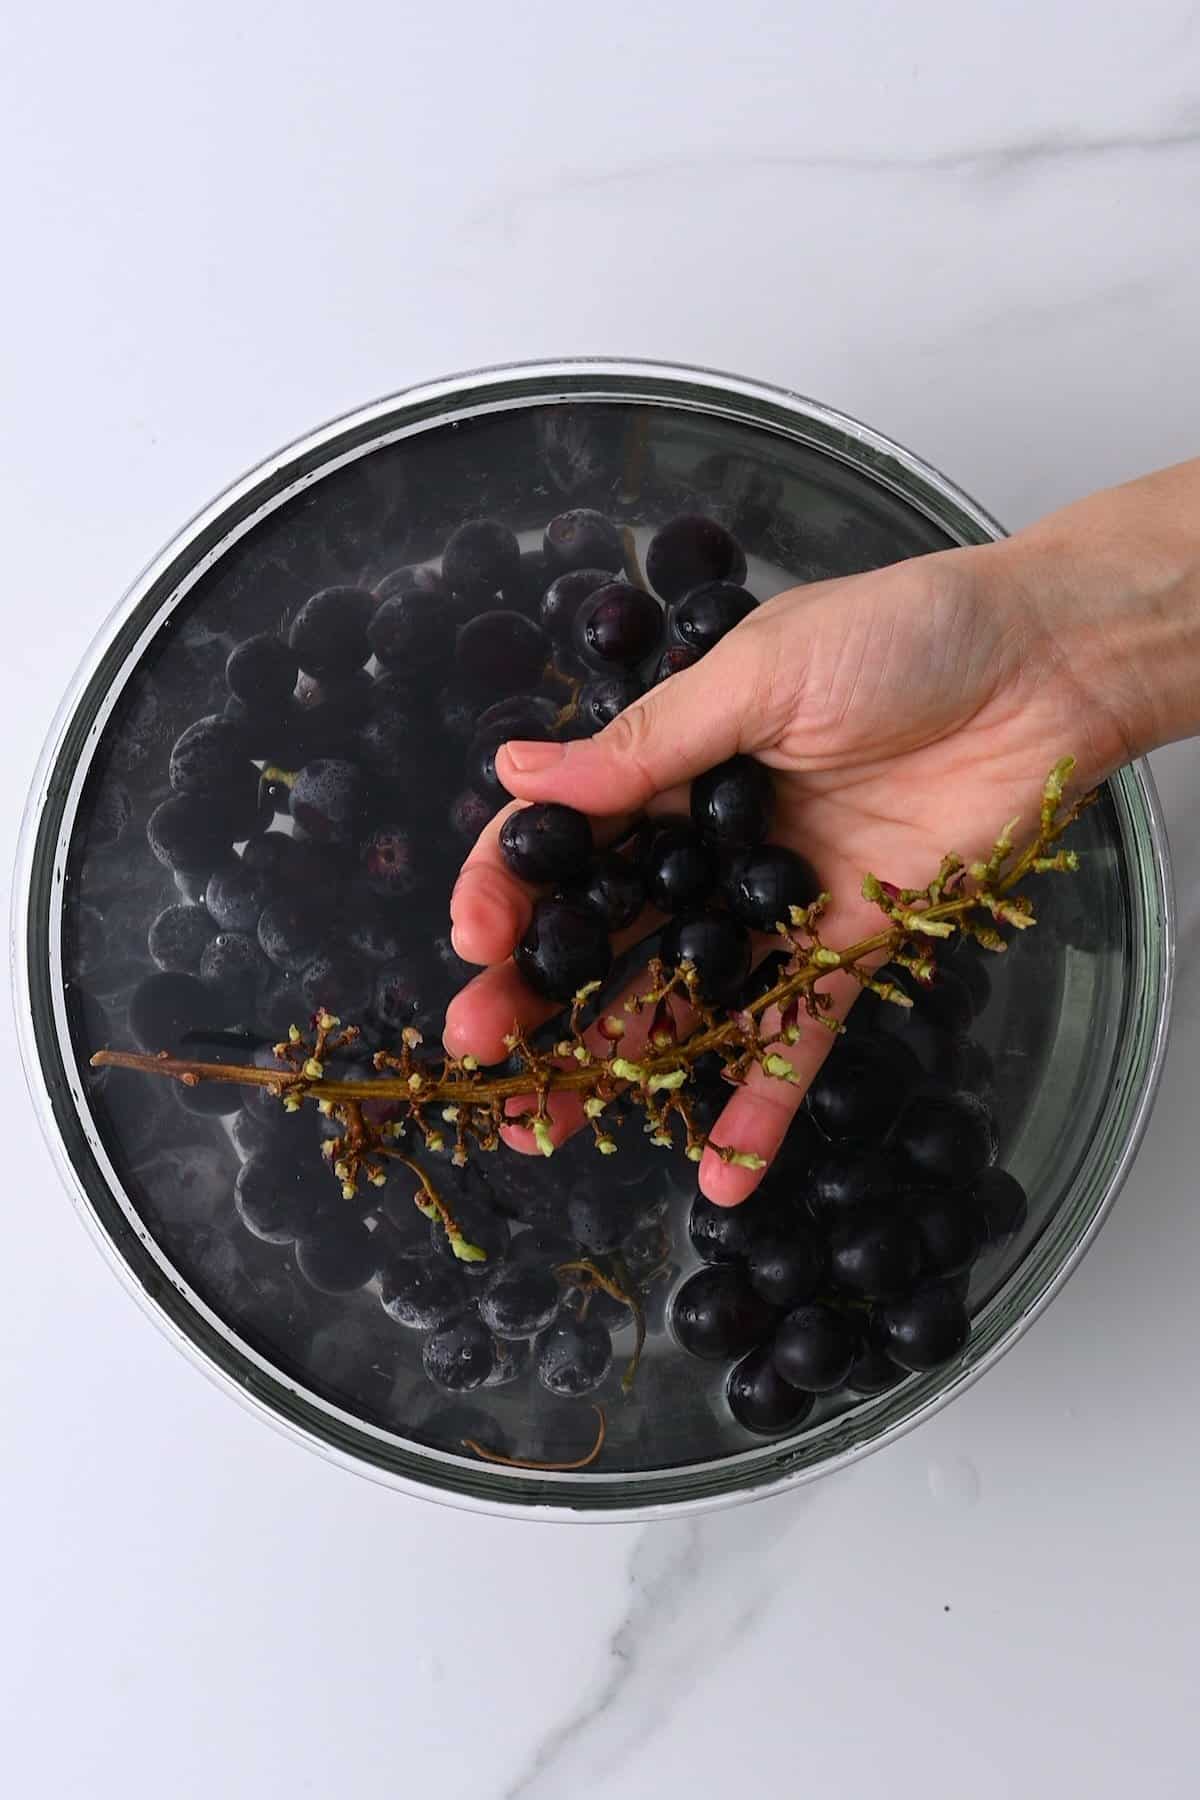 Rinsing grapes in a bowl with water